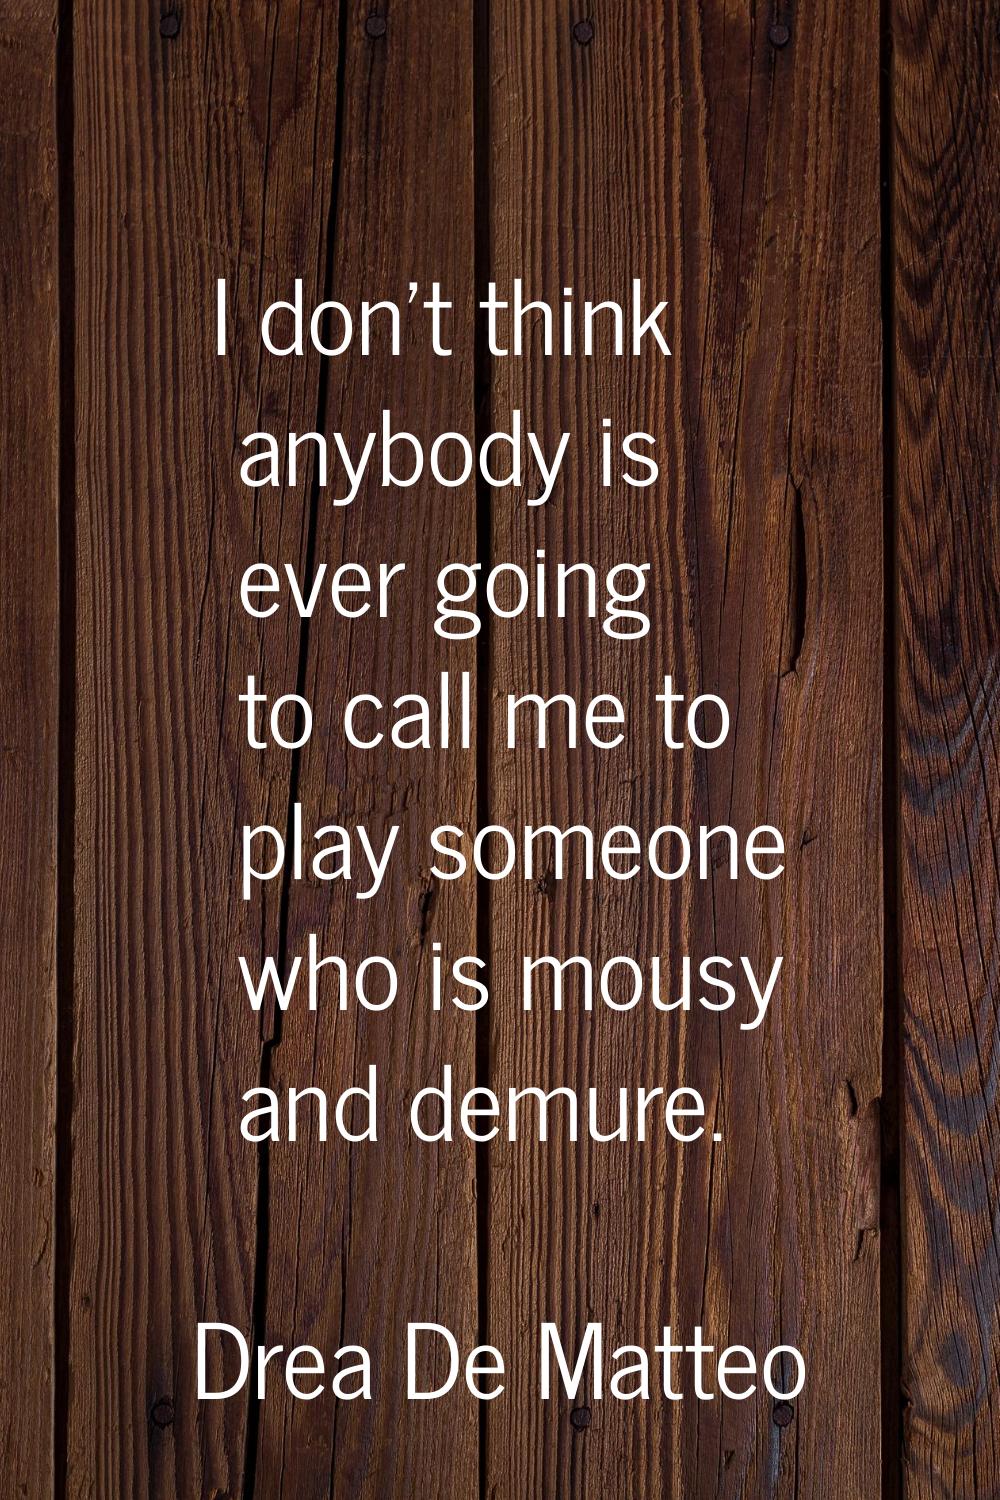 I don't think anybody is ever going to call me to play someone who is mousy and demure.